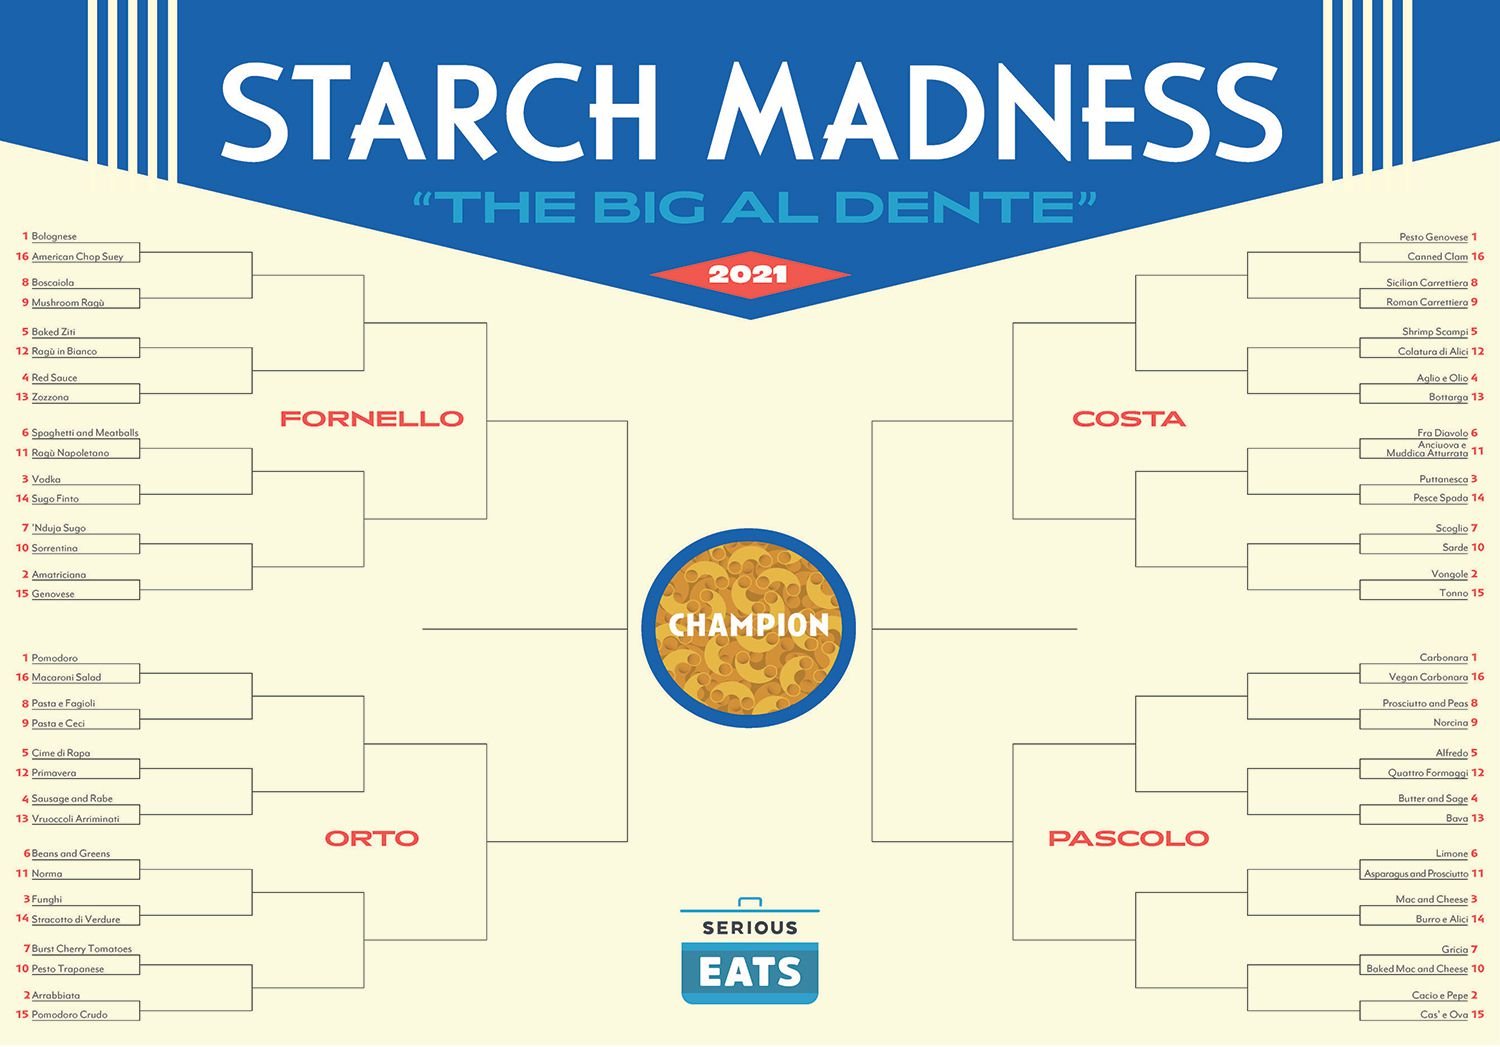 Starch Madness Is Back and Better Than Ever